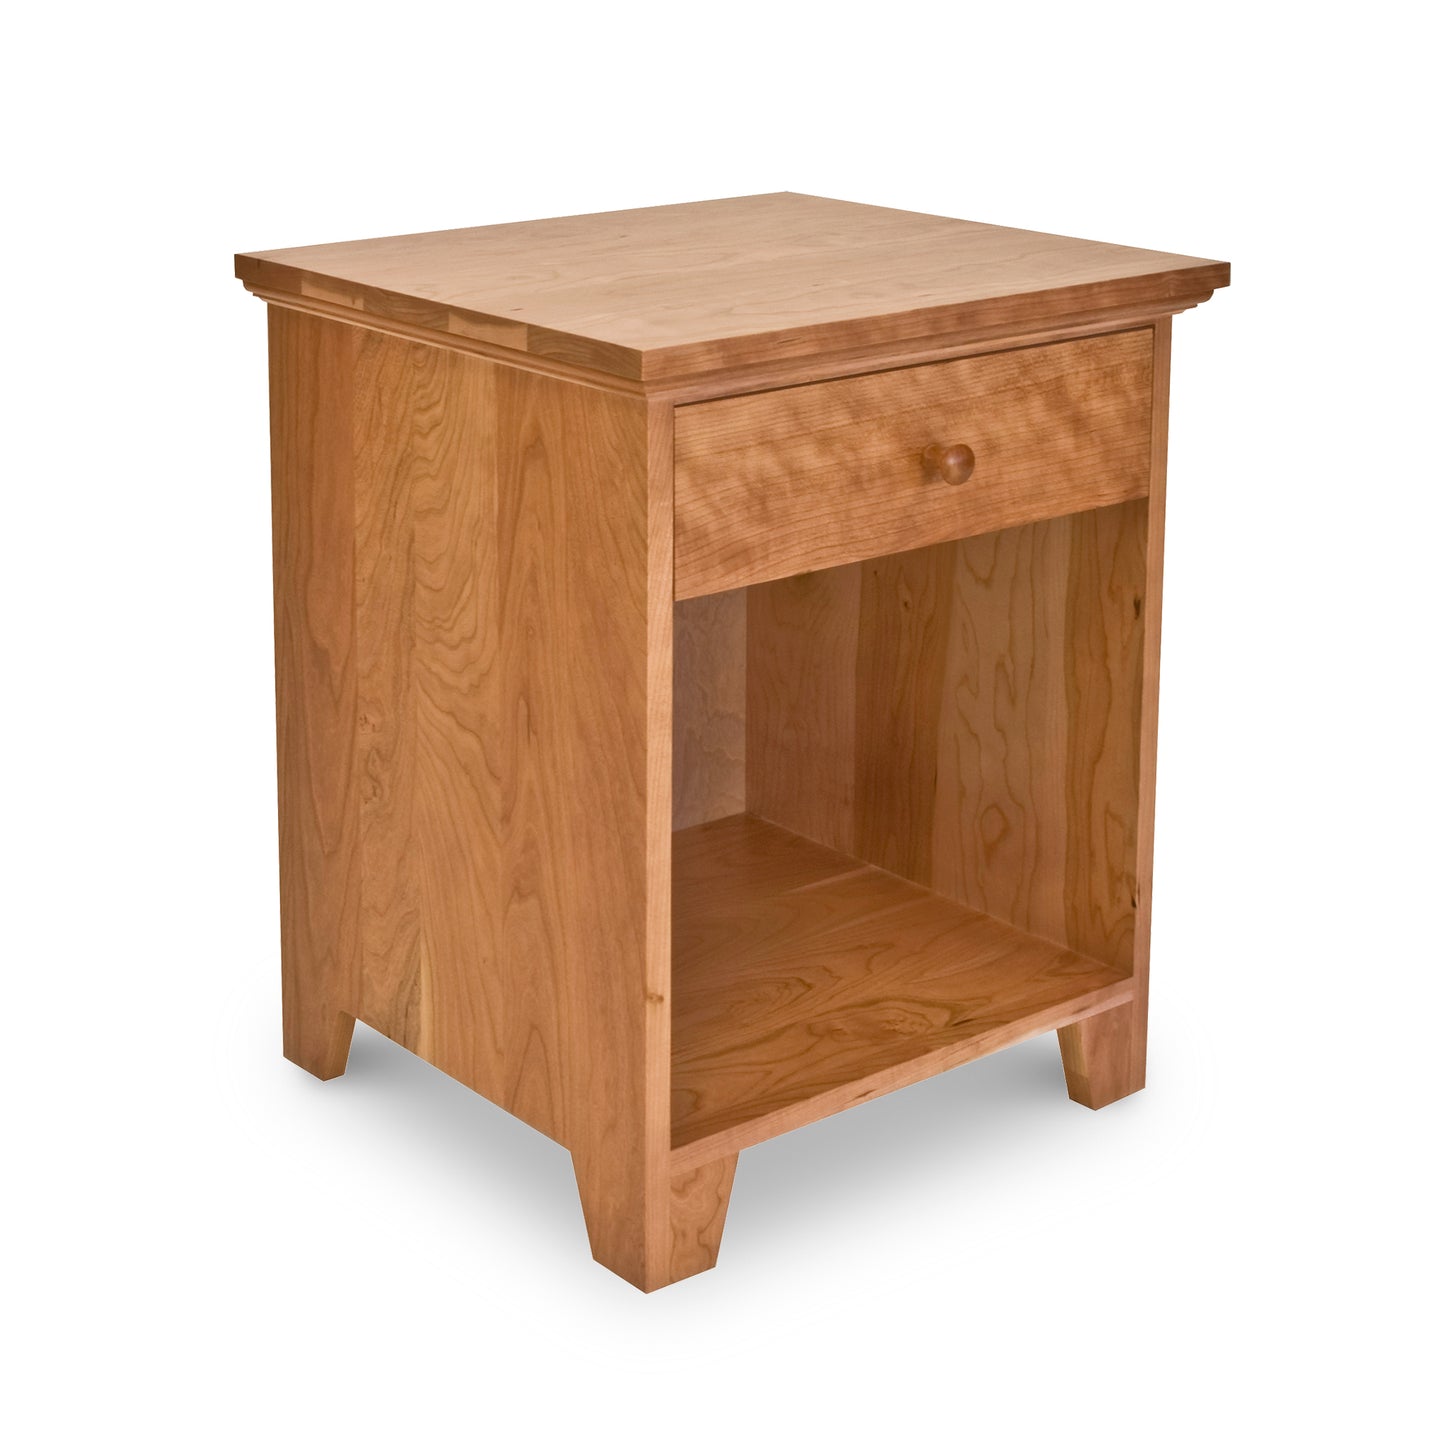 A Lyndon Furniture American Country 1-Drawer Enclosed Shelf Nightstand.